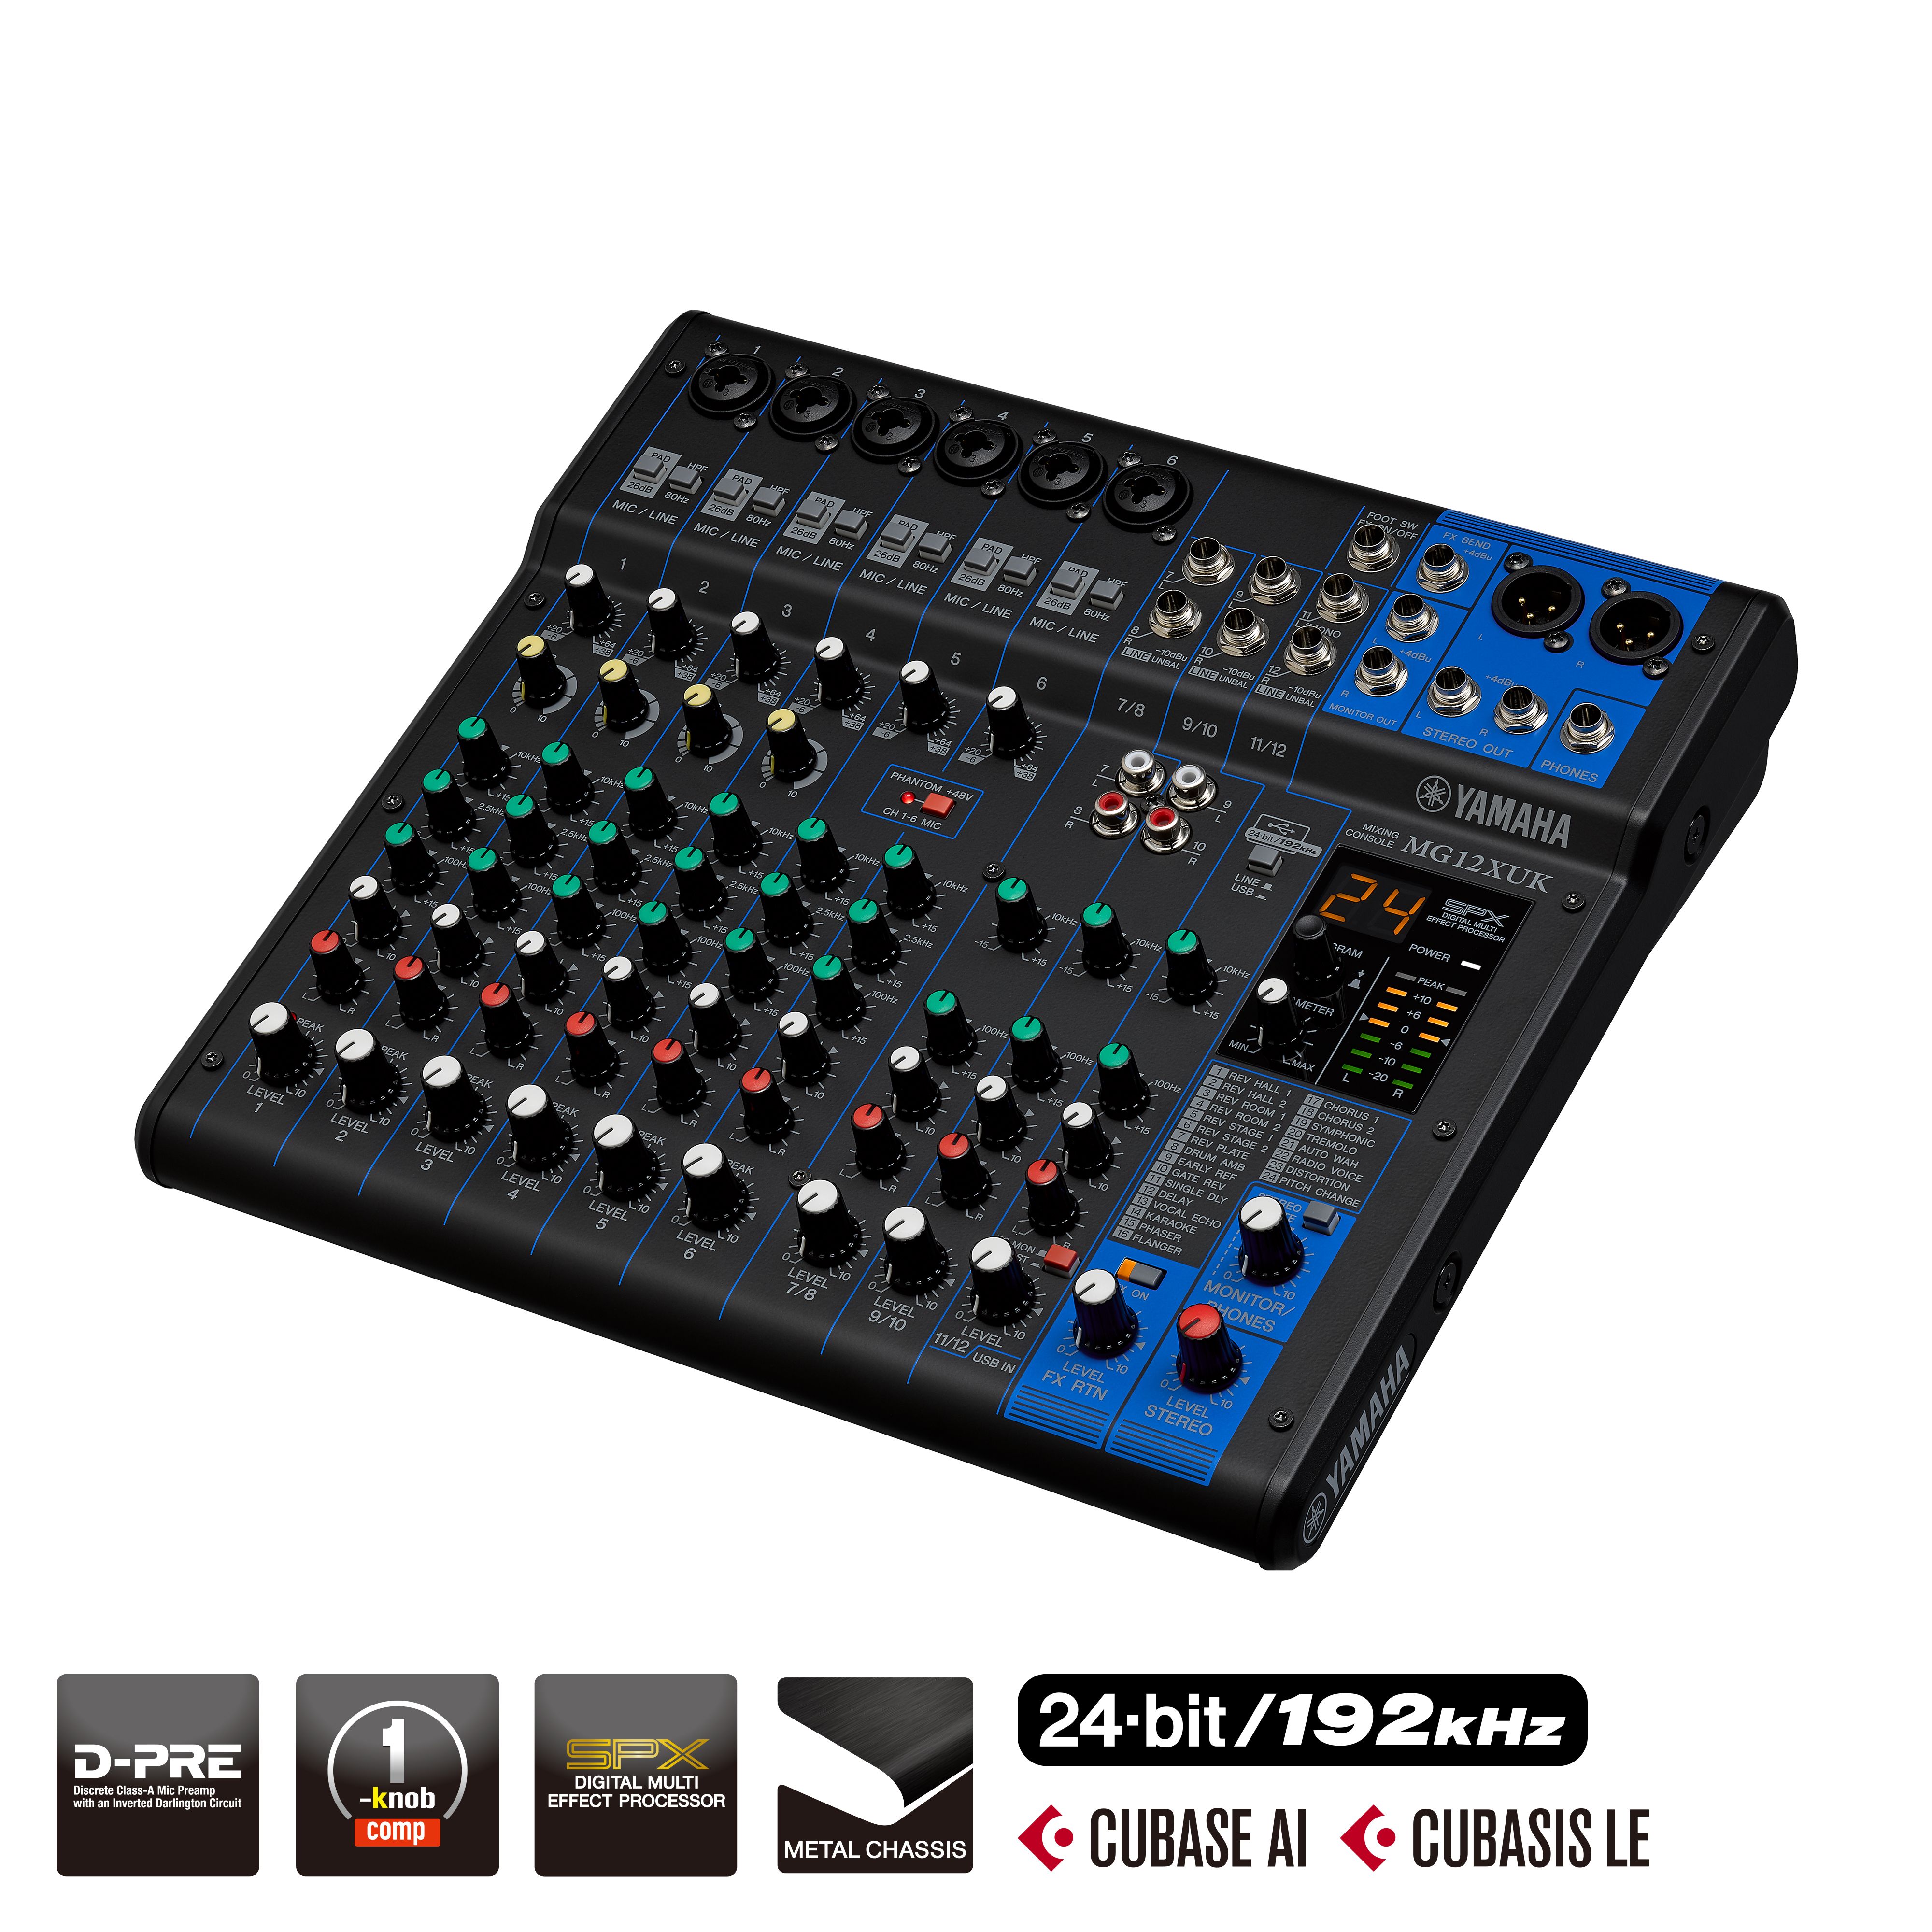 MG Series - Overview - Mixers - Professional Audio - Products 